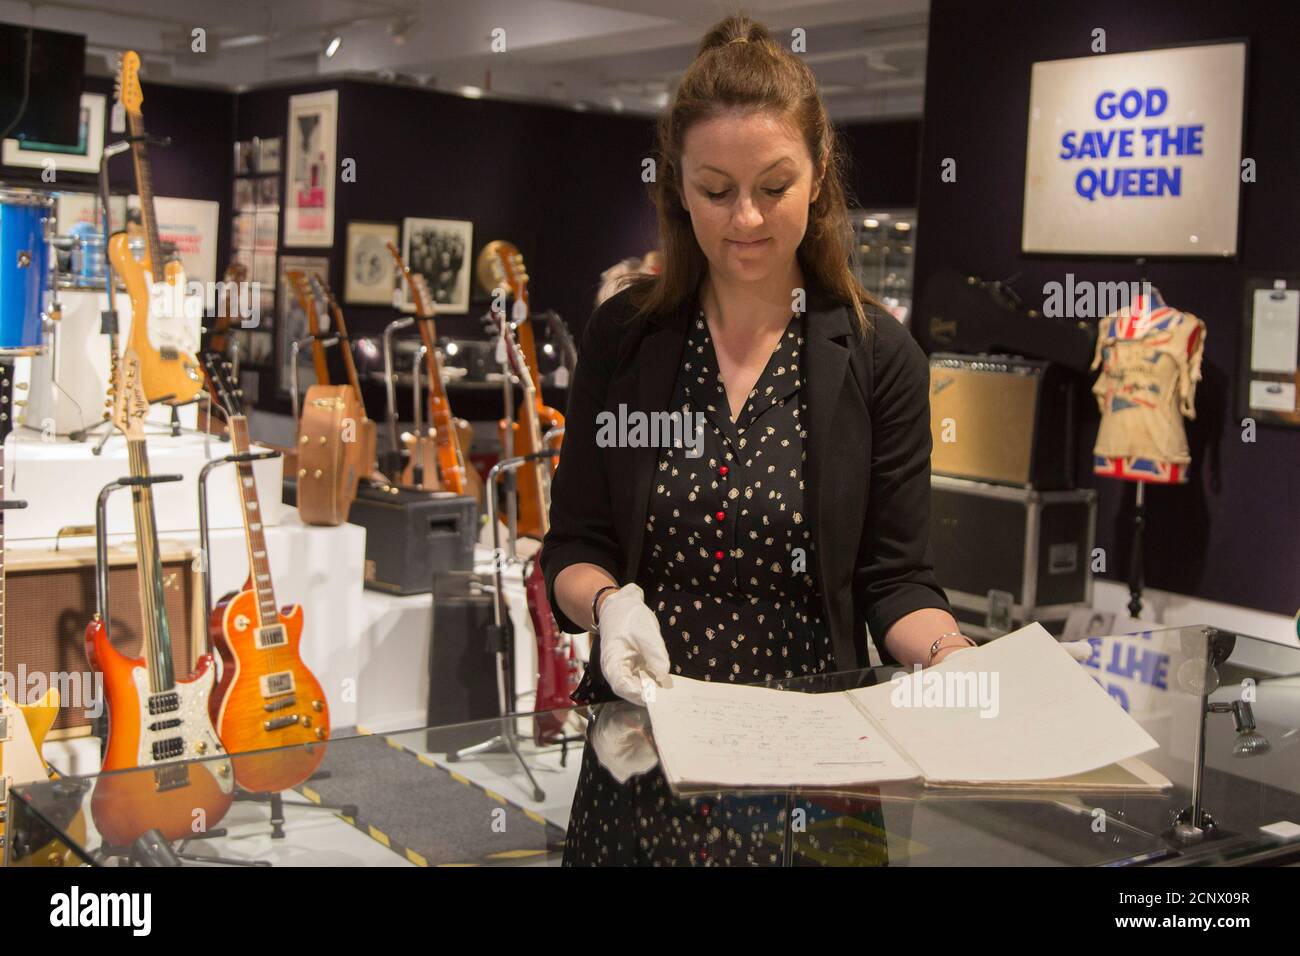 London, UK. 28 June 2016. A Bonhams employee looks through Freddie Mercury's studio lyric book, used while recording The Miracle and Innuendo, est. GBP 50,000-70,000. Bonhams presents lots from the forthcoming Entertainment Memorabilia sale taking place on 29 June. Stock Photo